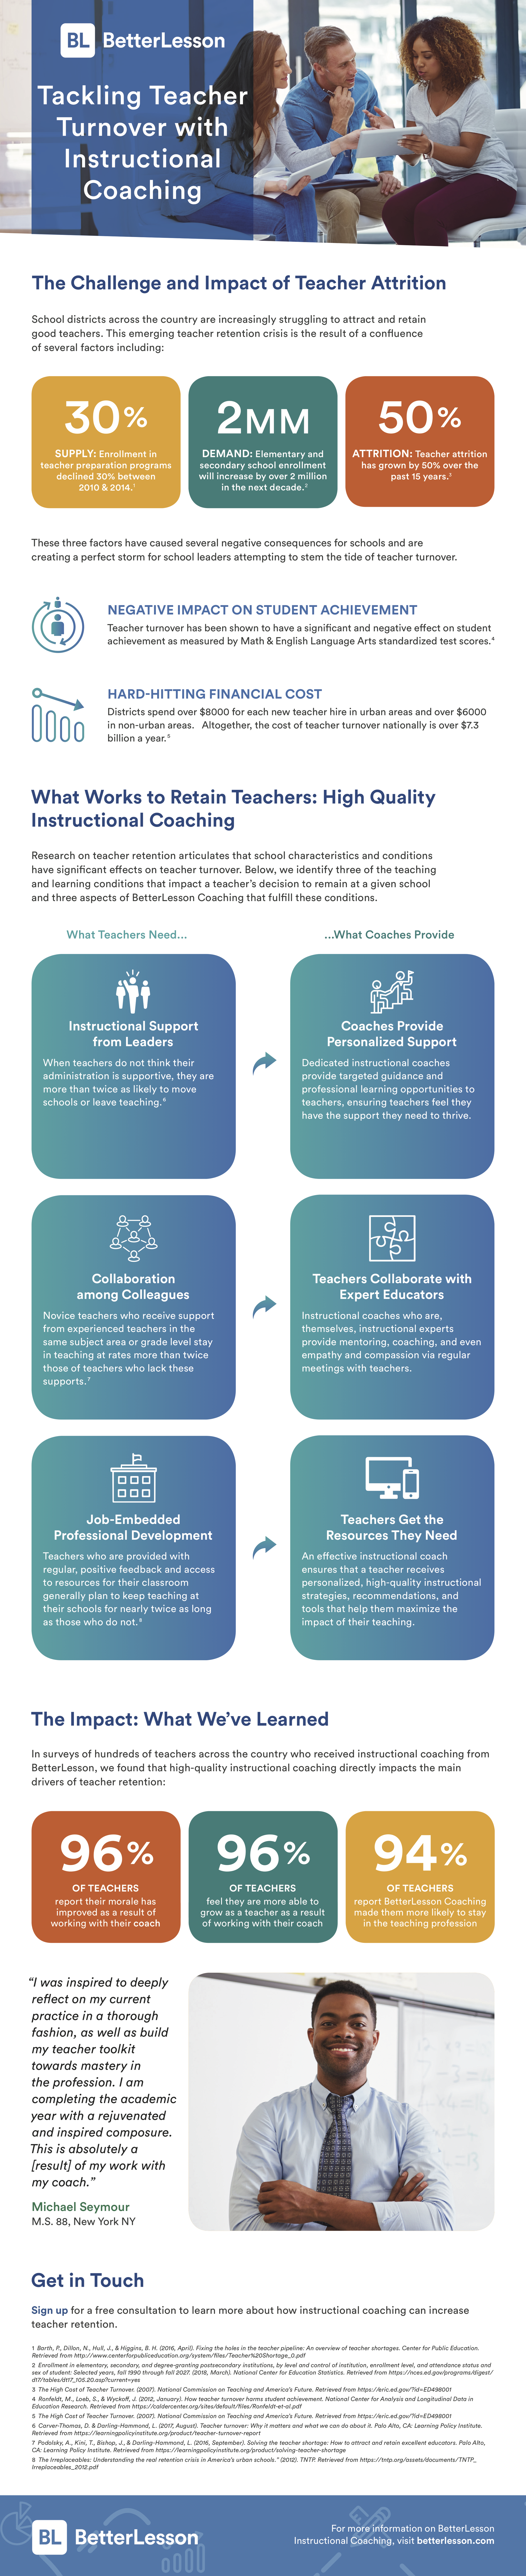 Infographic showing the impact of coaching on teacher turnover